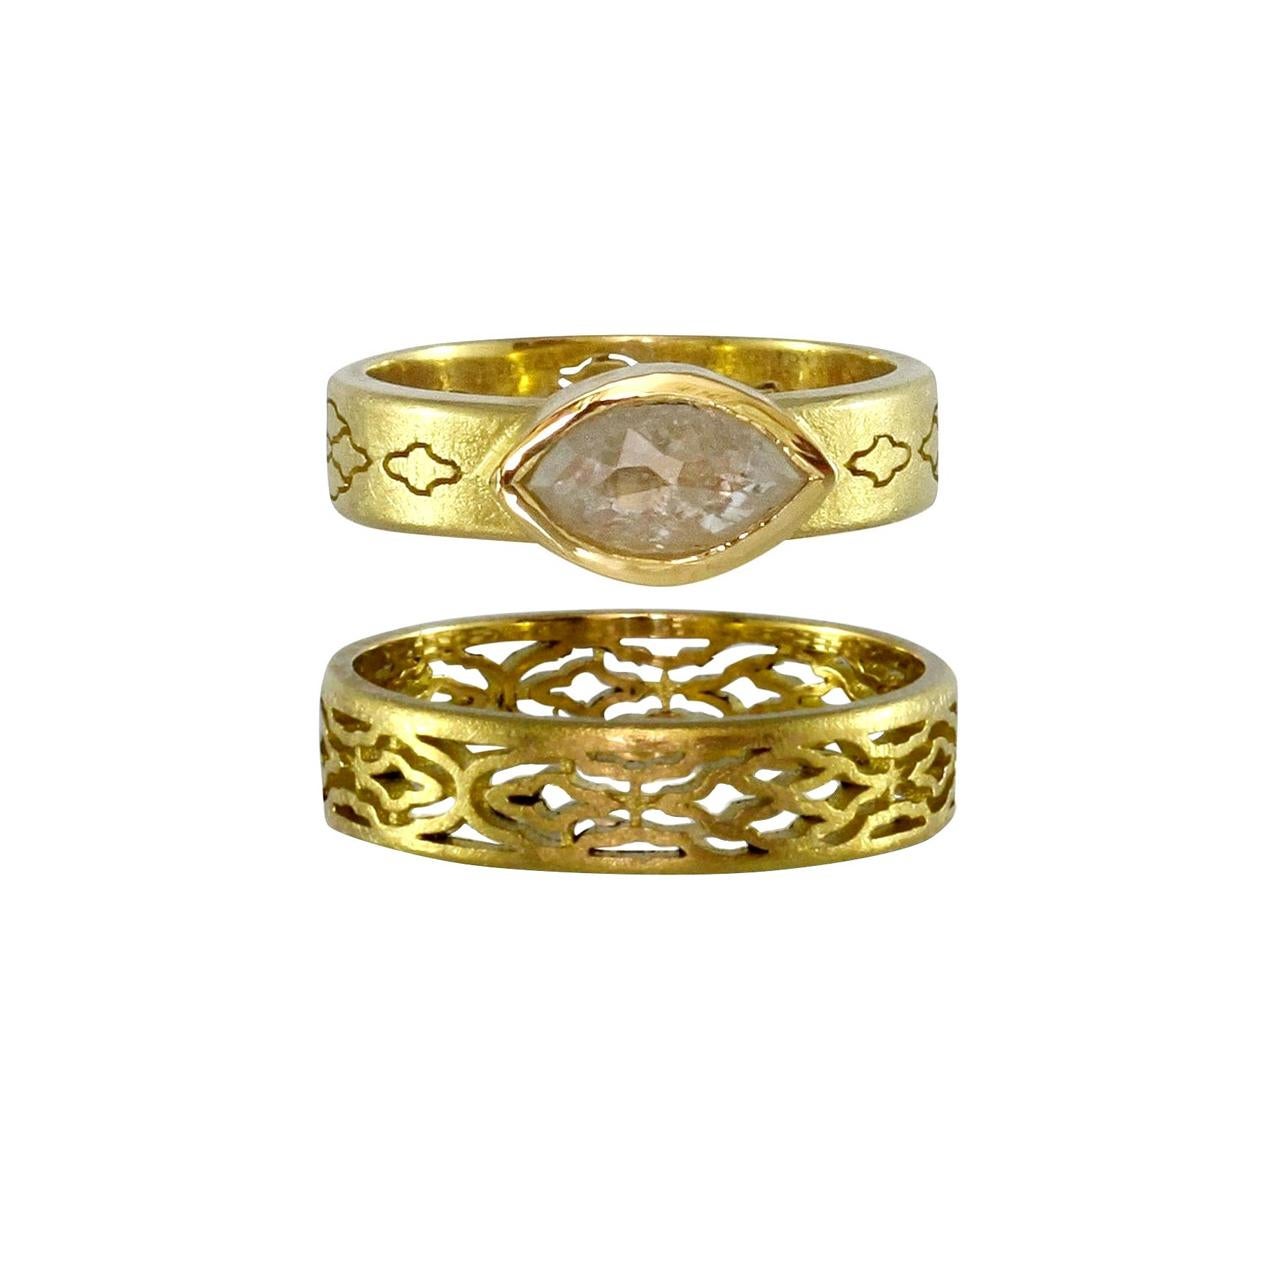 Contemporary Luca Jouel Marquise Diamond Arabesque Ring and Arabesque Band in Yellow Gold